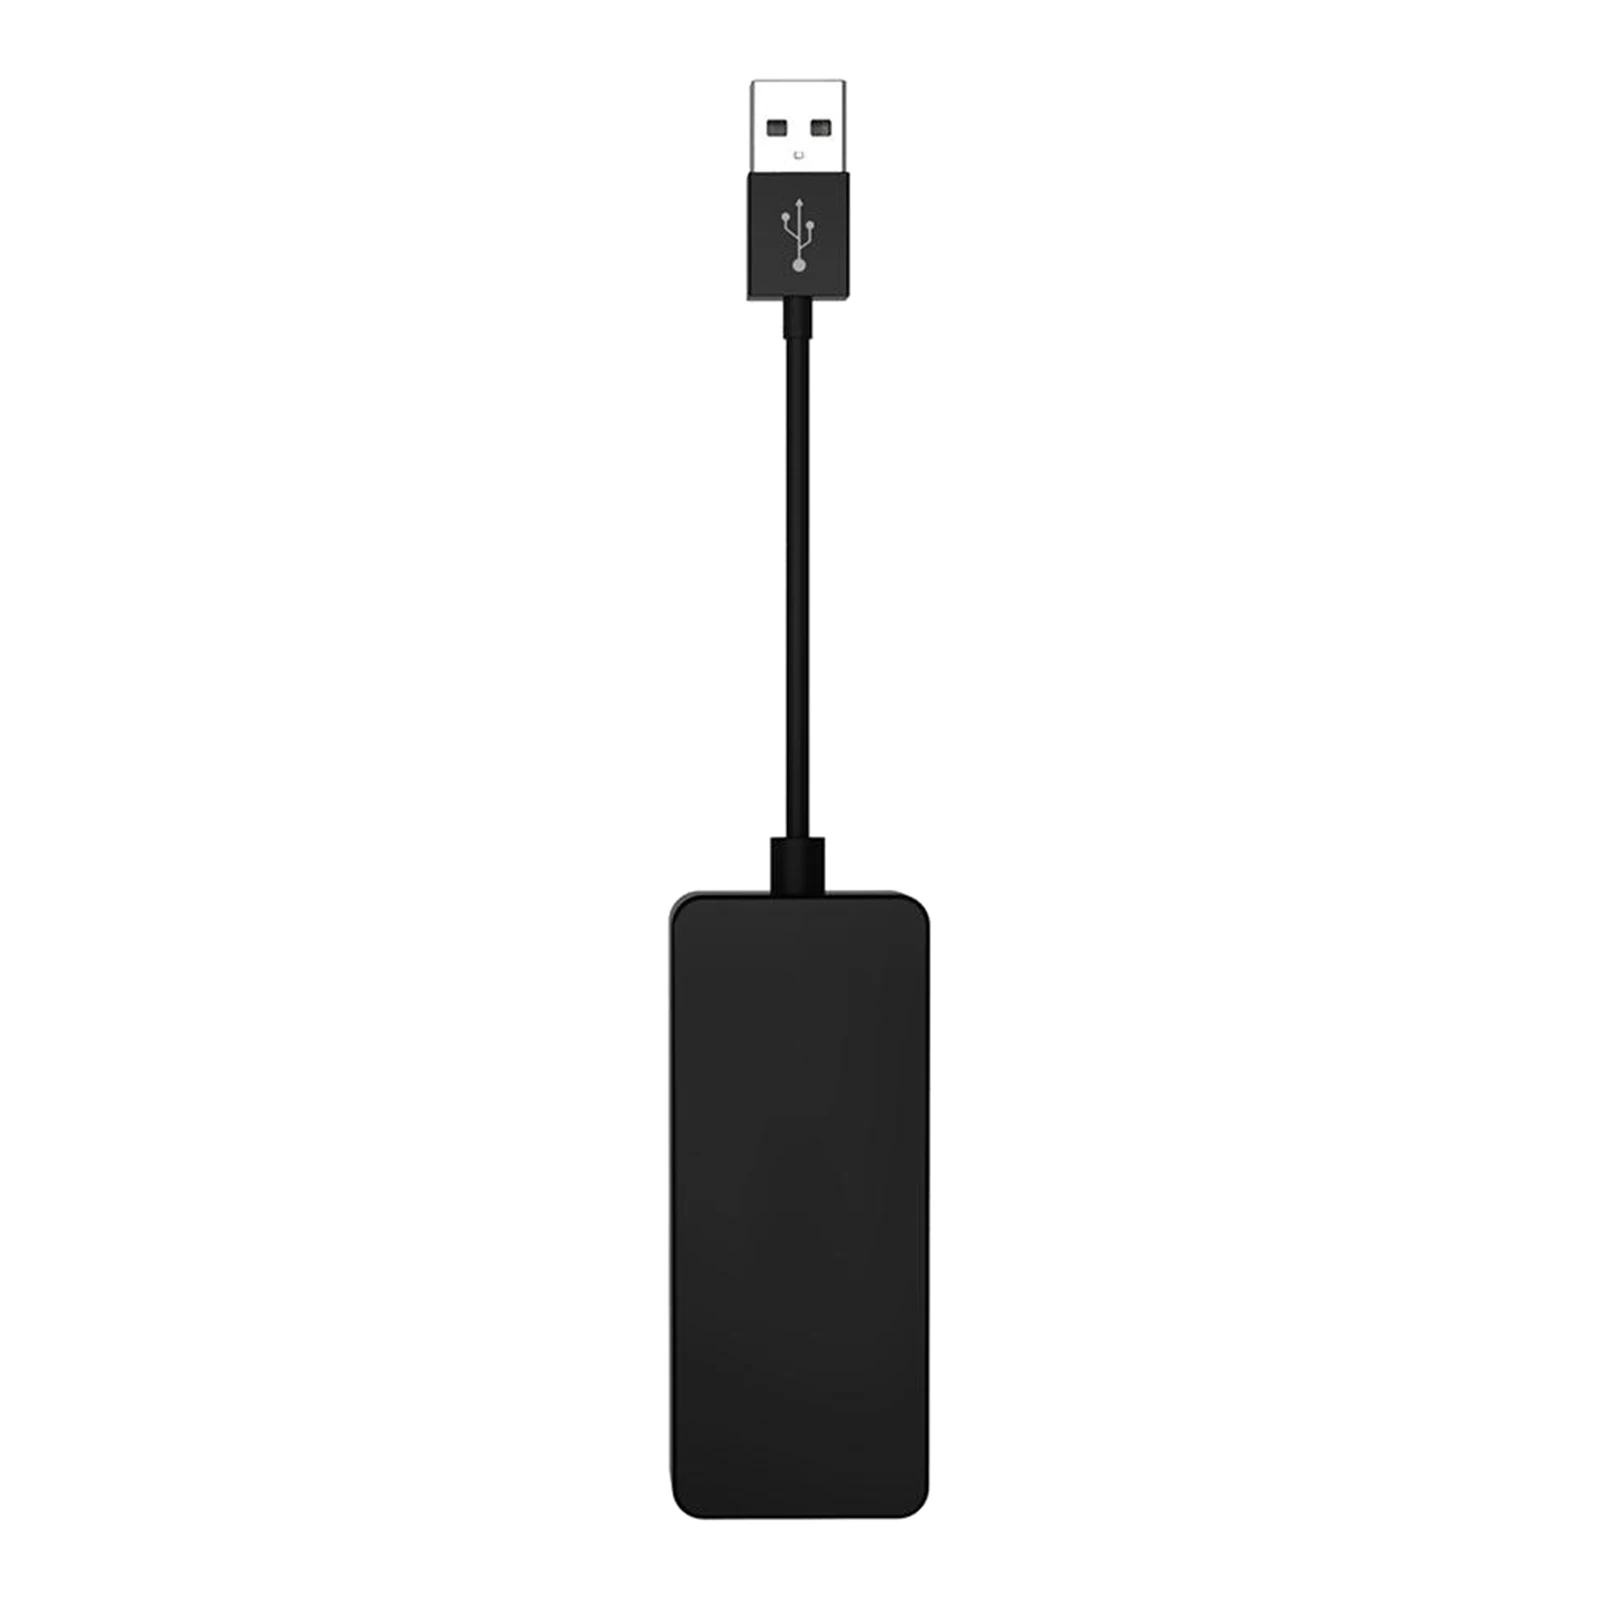 Wired Connection  Dongle for Android Navigation Player Smart Link USB  Stick with Android Auto